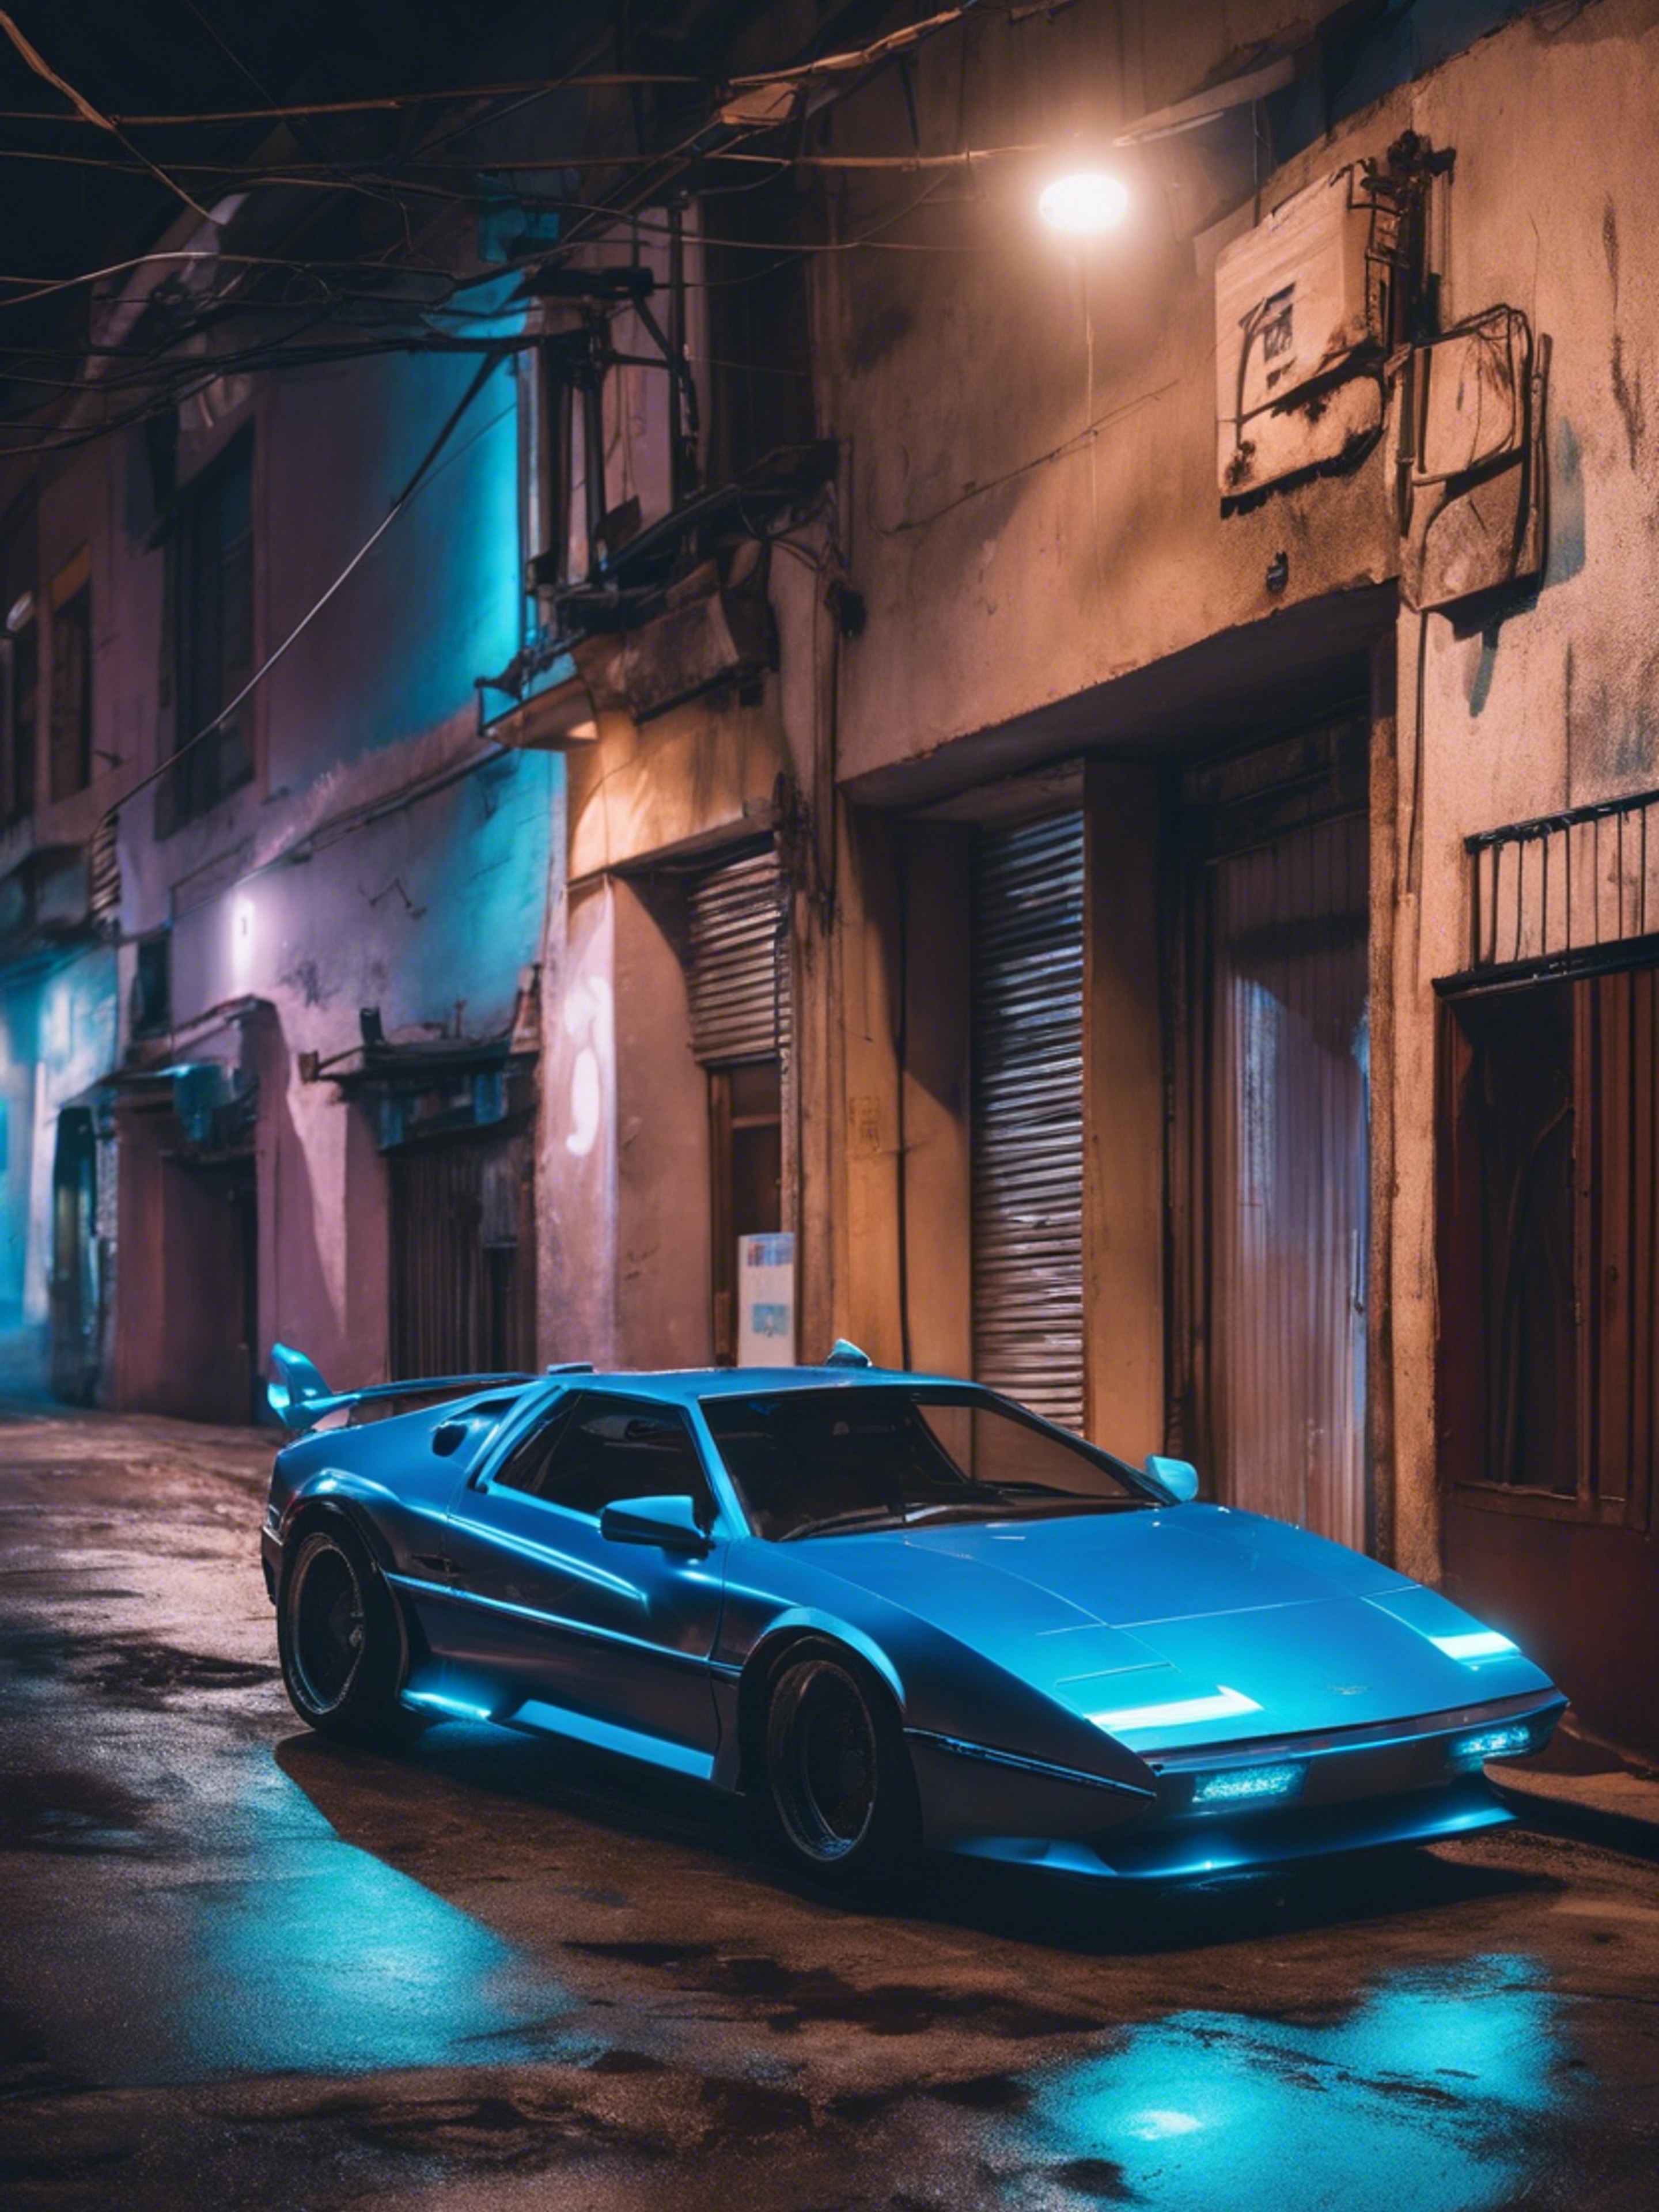 A cyberpunk themed sports car glowing with neon blue underlights parked in a dim alley. Hintergrund[b442527eec5a4d00a6f1]